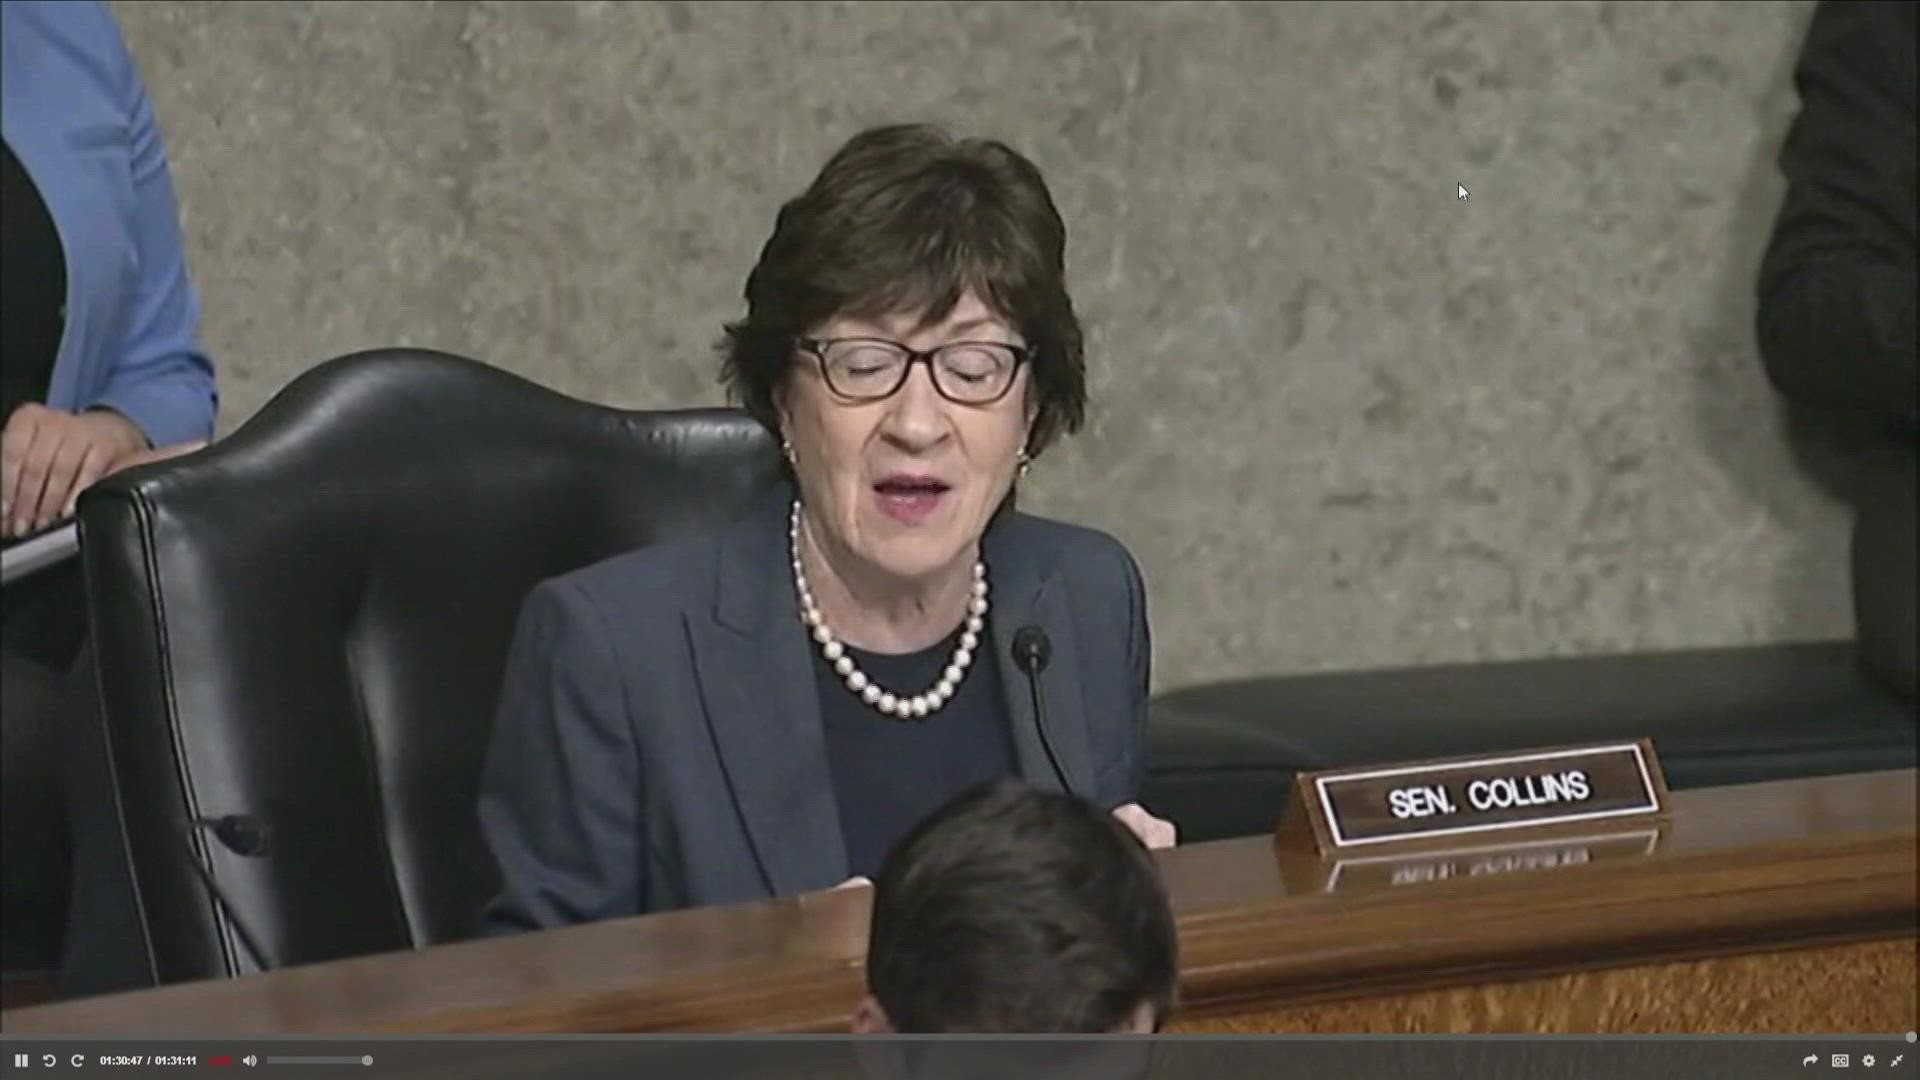 Senator Susan Collins is part of the U.S. Senate Health Committee, which held a hearing on Capitol Hill Thursday to talk with health officials about COVID-19.